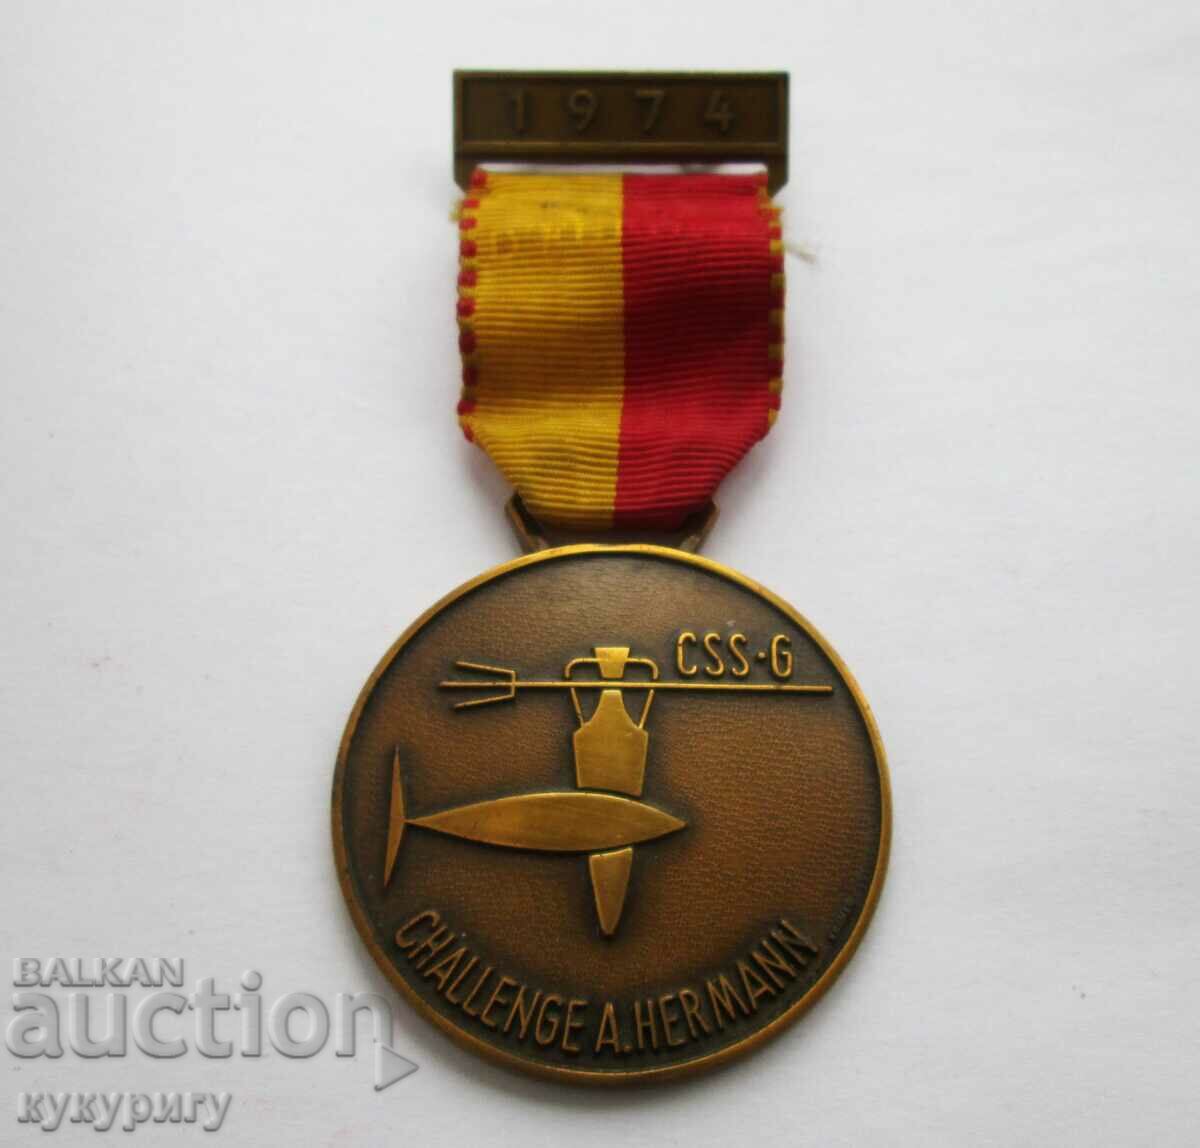 Old divers medal competition underwater diving diver